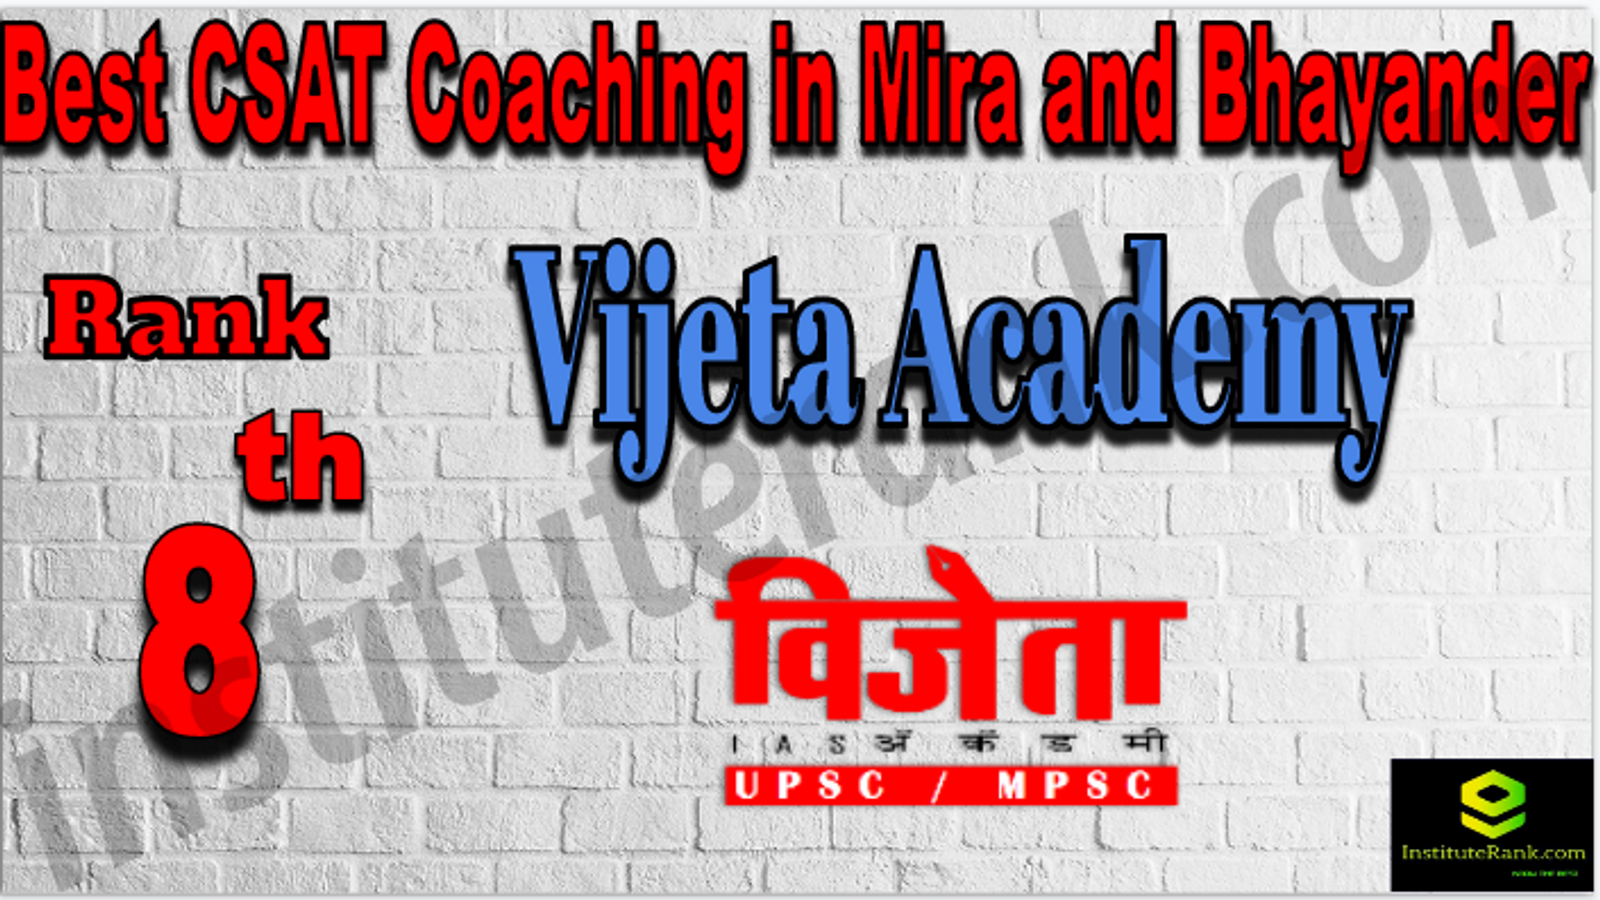 8TH CSAT Coaching in Mira and Bhayander